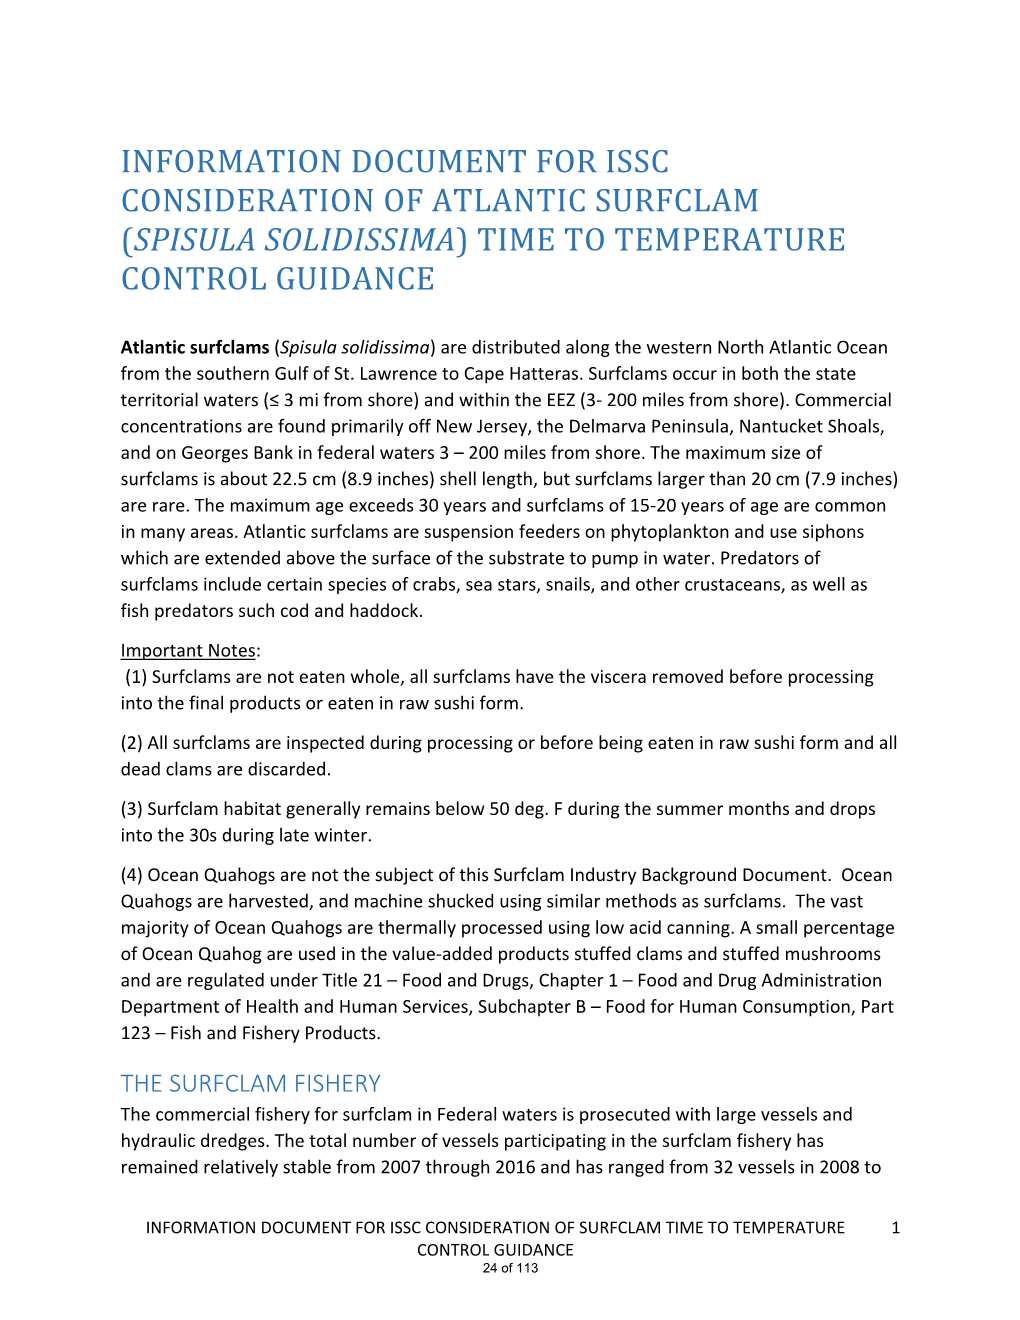 Information Document for Issc Consideration of Atlantic Surfclam (Spisula Solidissima) Time to Temperature Control Guidance